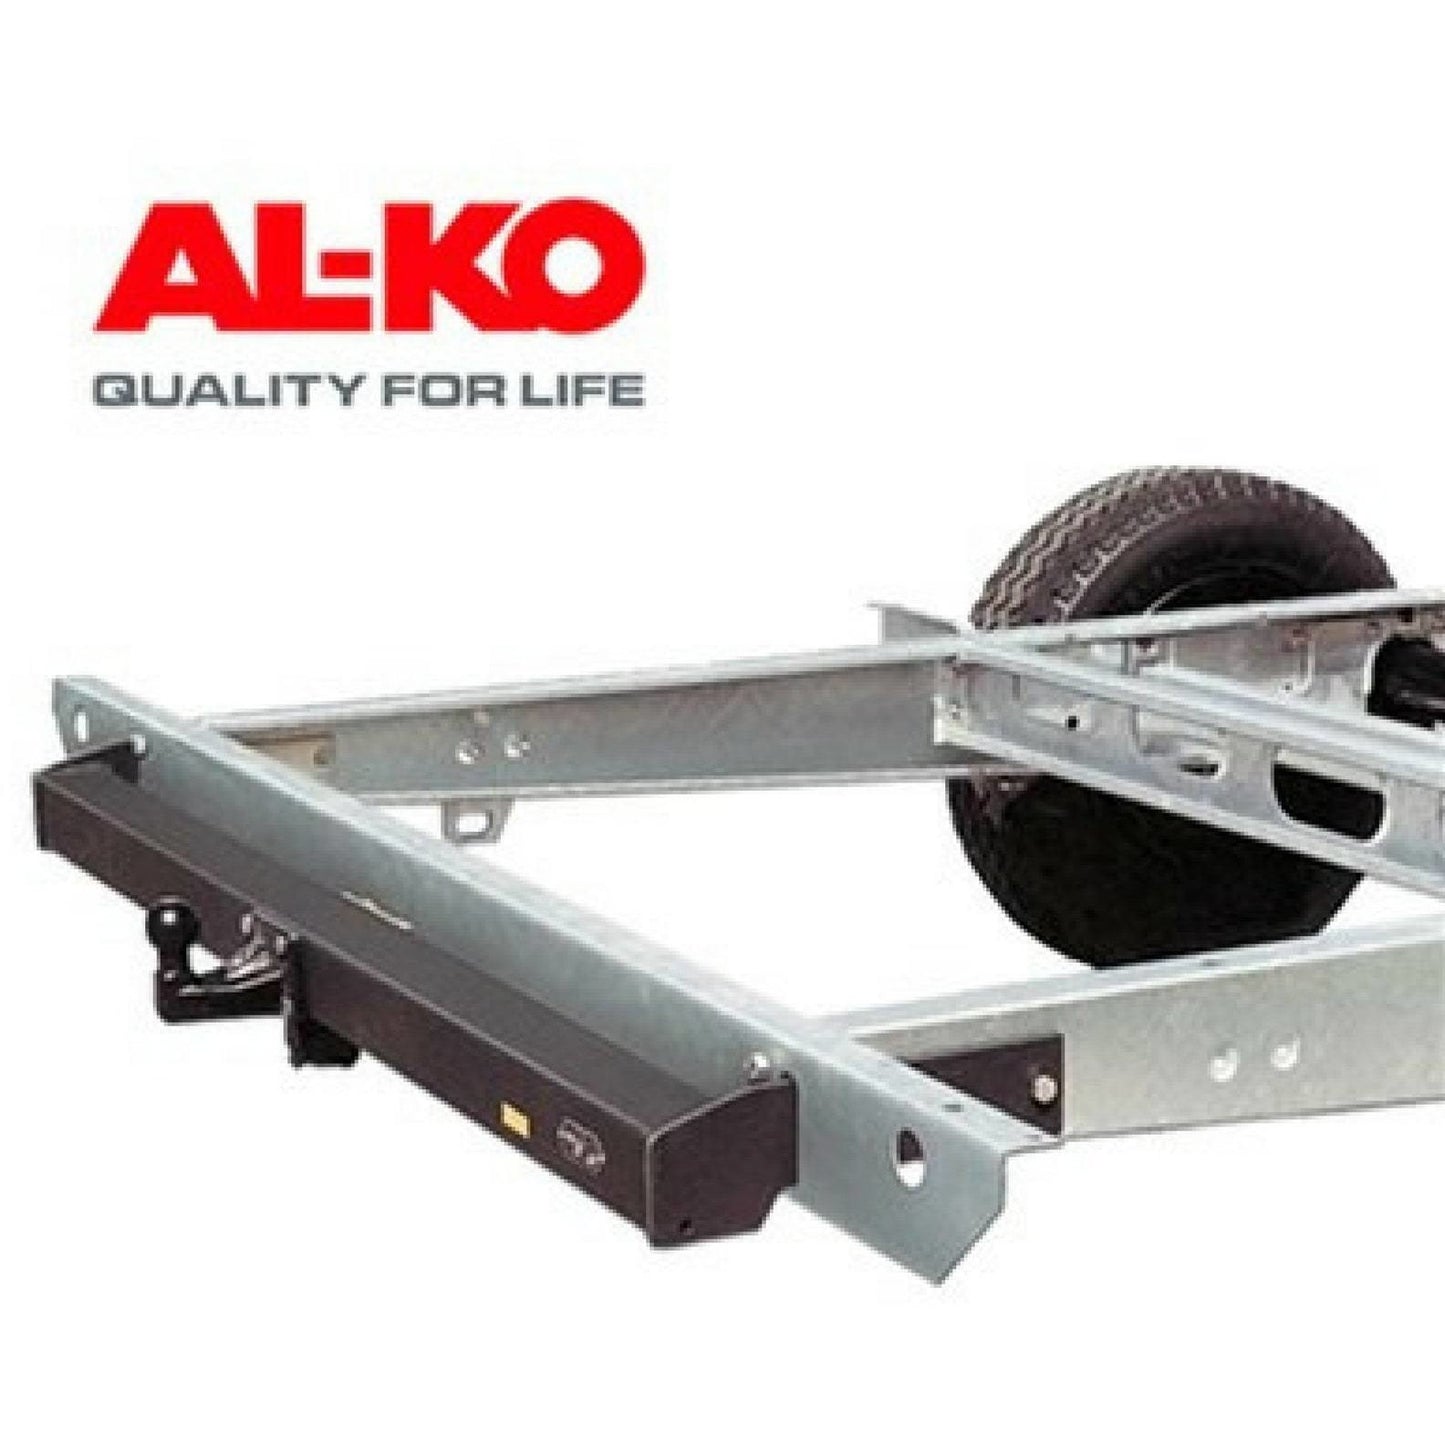 ALKO Towbar Assembly (261732) made by ALKO. A Towing sold by Quality Caravan Awnings